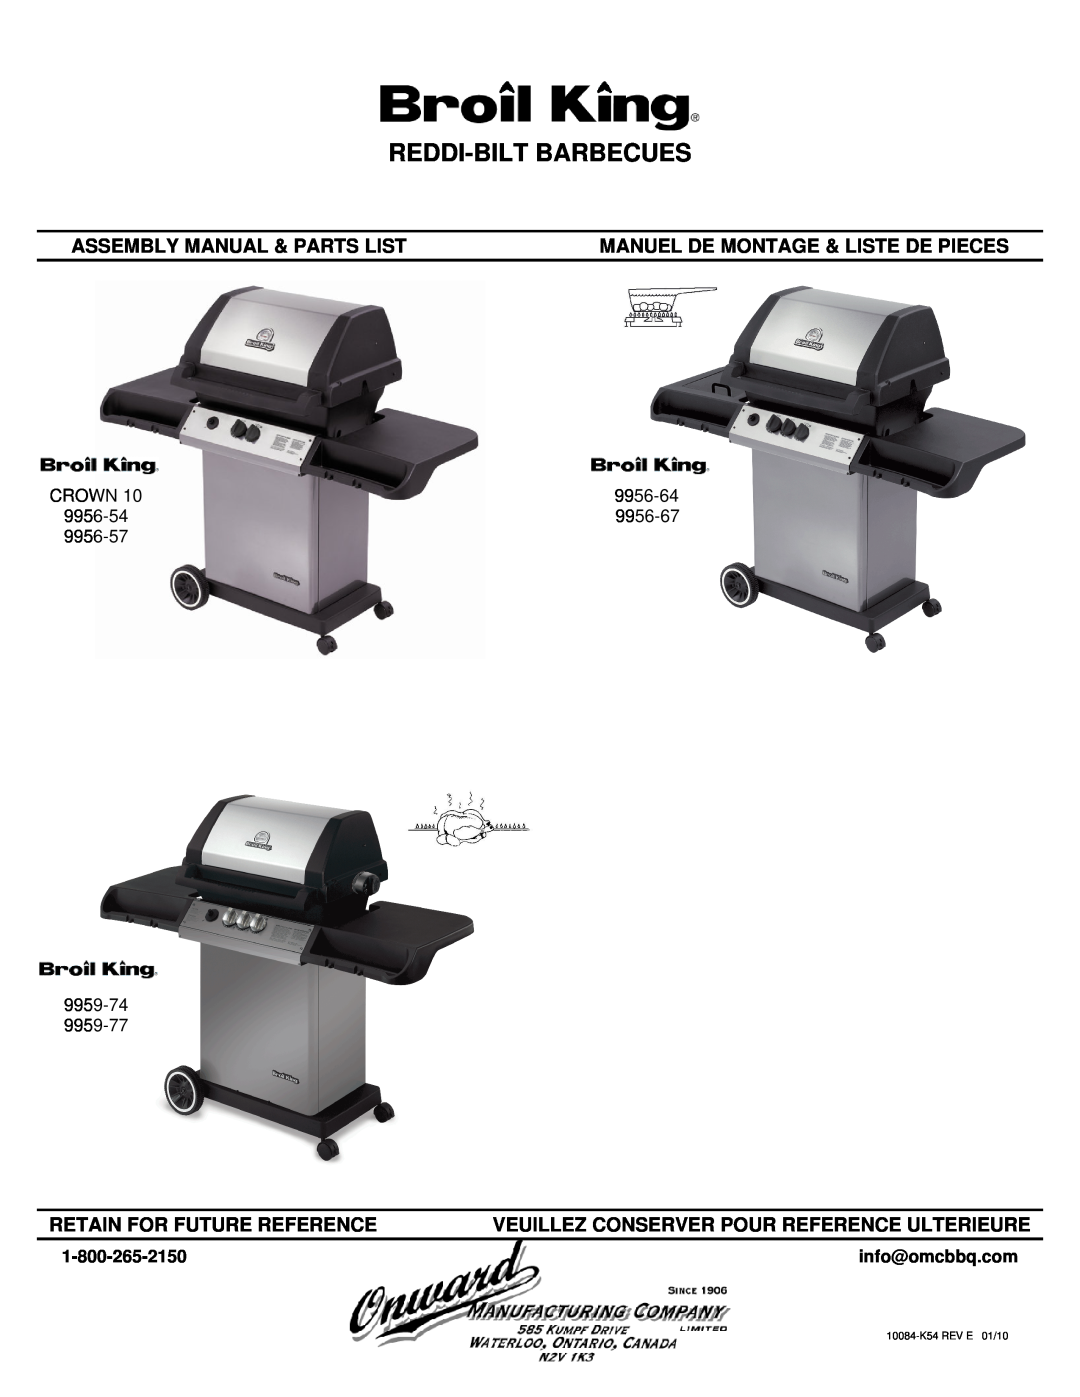 Broil King 9956-57 manual info@omcbbq.com, Reddi-Bilt Barbecues, Assembly Manual & Parts List, Retain For Future Reference 